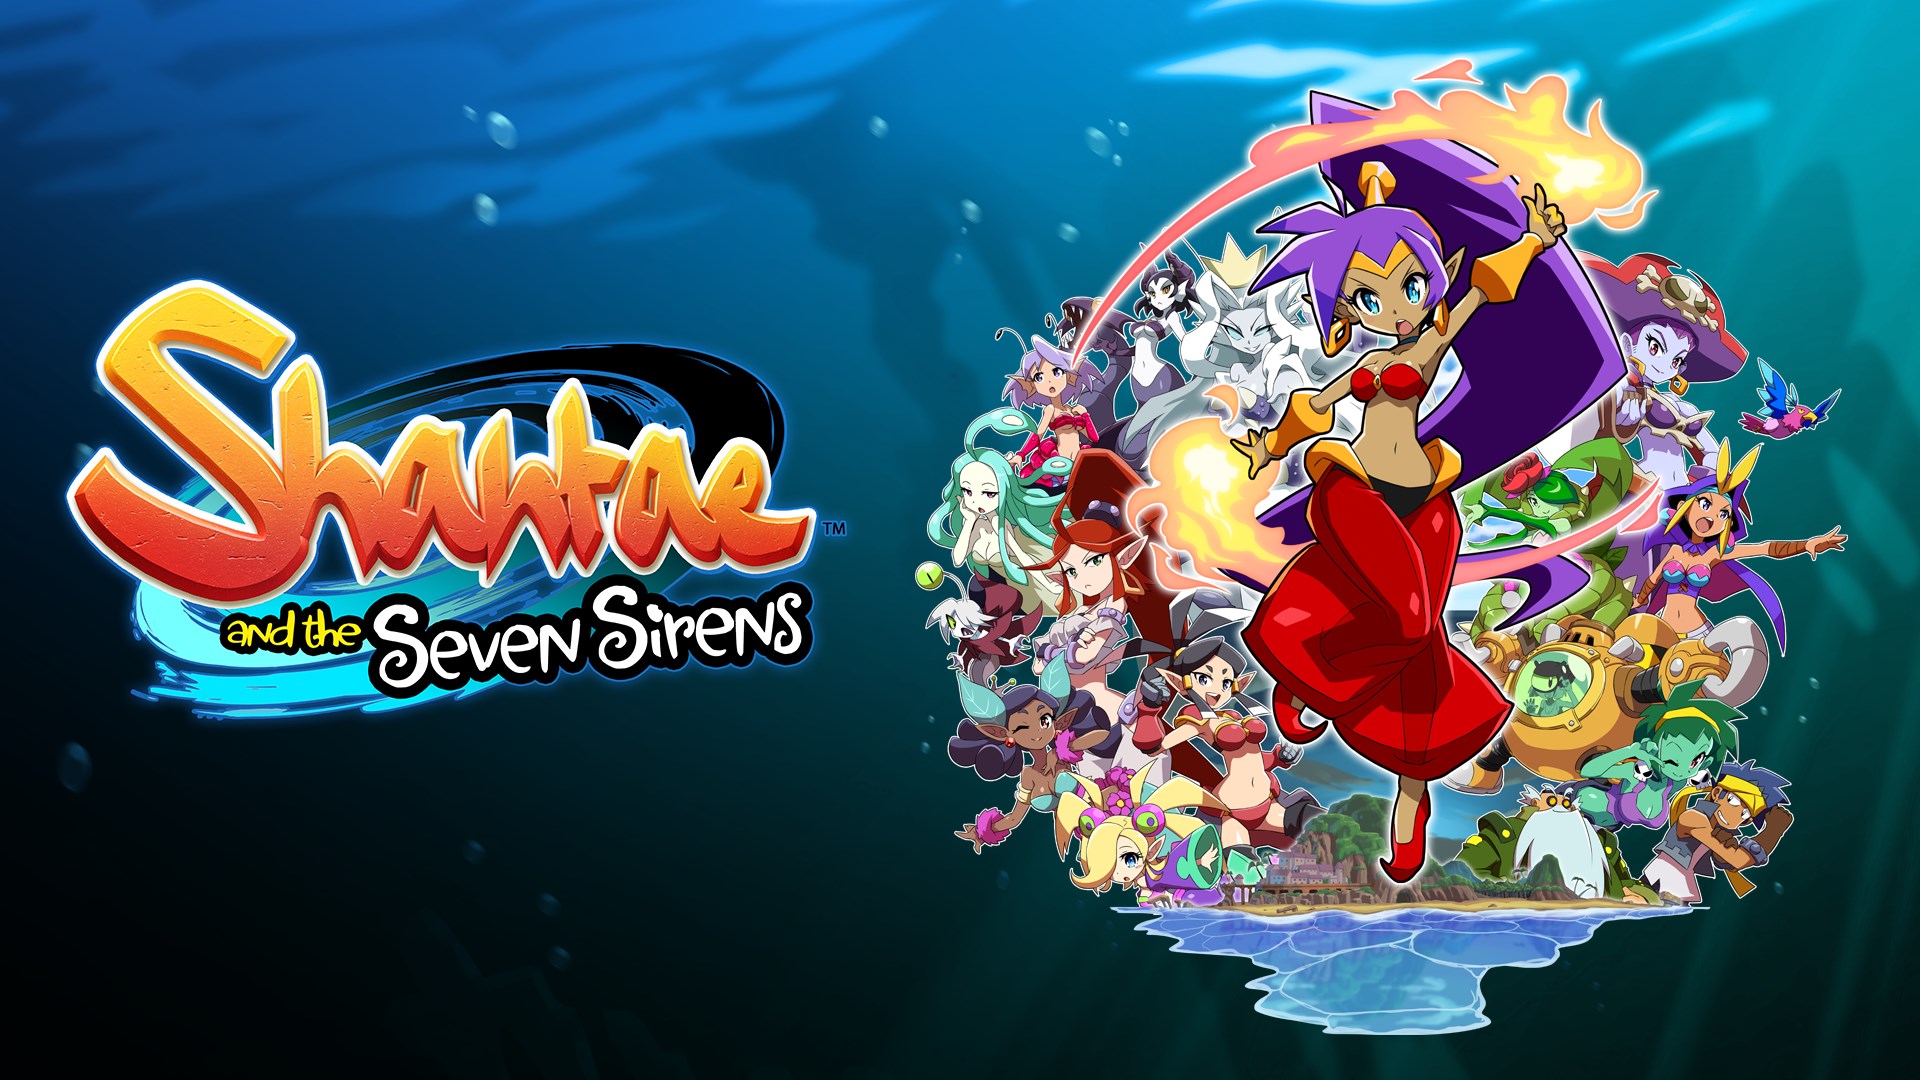 shantae and the seven sirens xbox